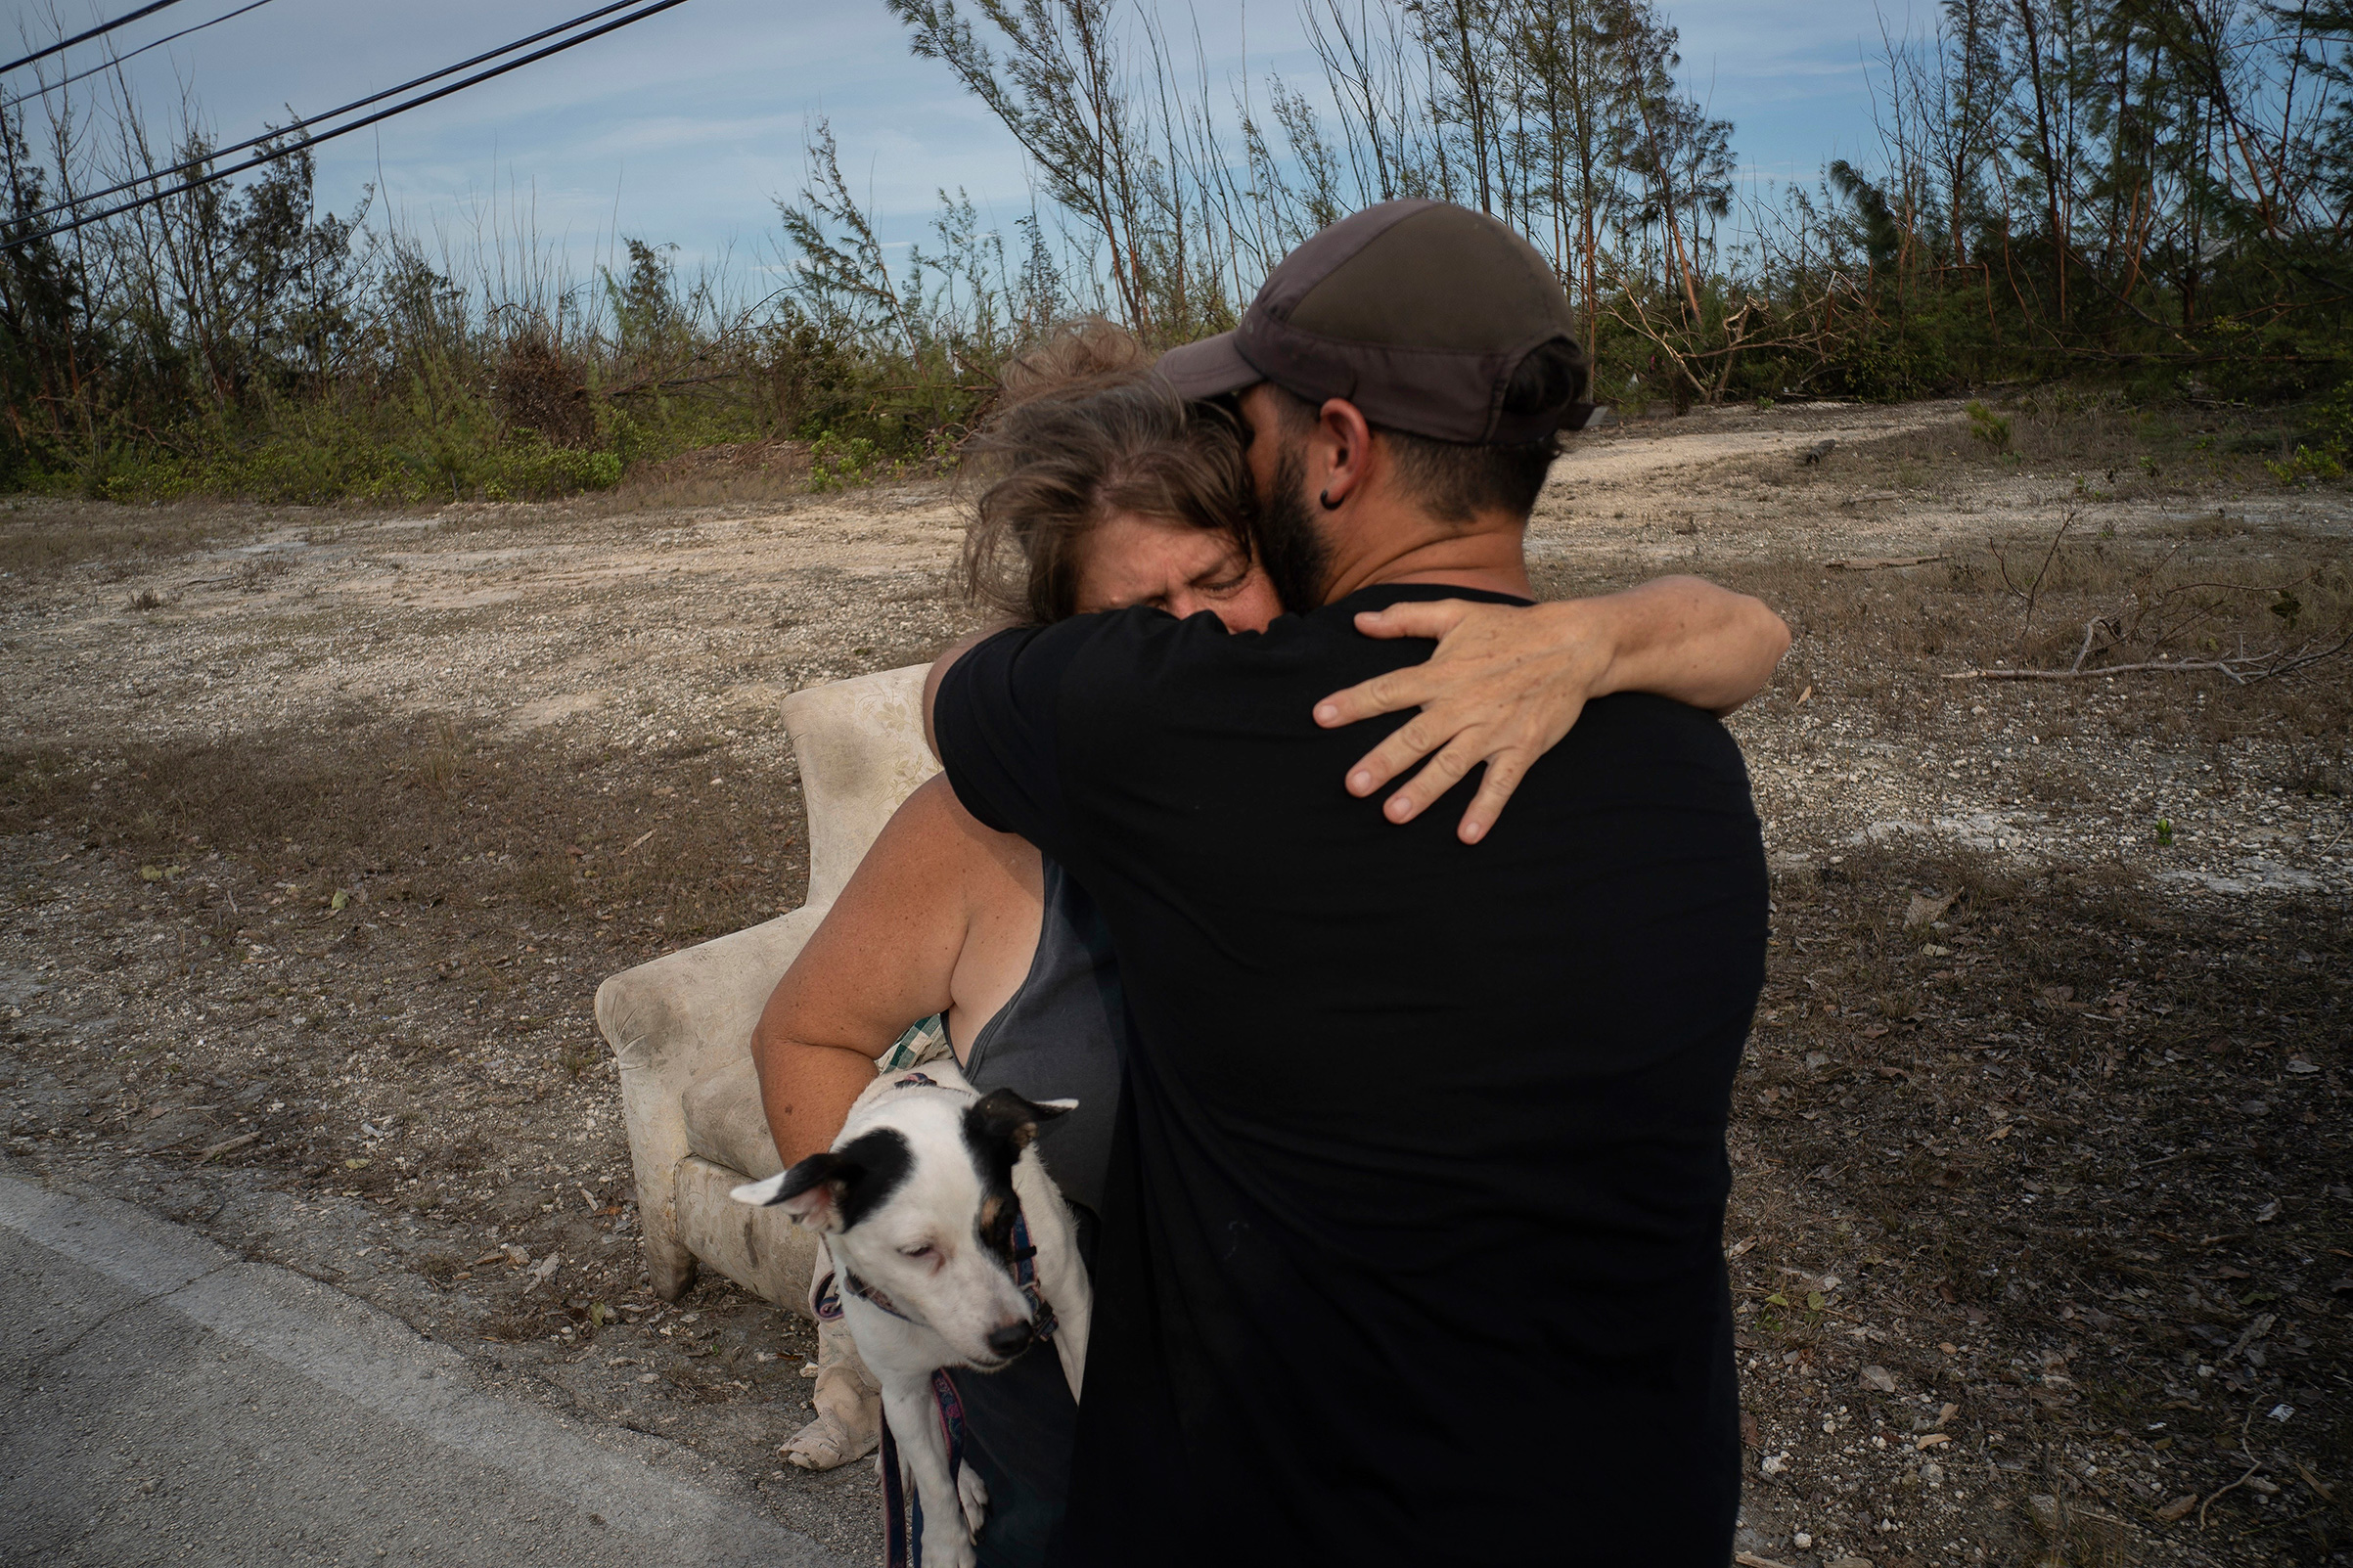 Sissel Mosvold embraces a volunteer who helped rescue her mother from her home when it was flooded by the waters of Hurricane Dorian, in the outskirts of Freeport, Bahamas, Sept. 4, 2019. (Ramon Espinosa—AP)